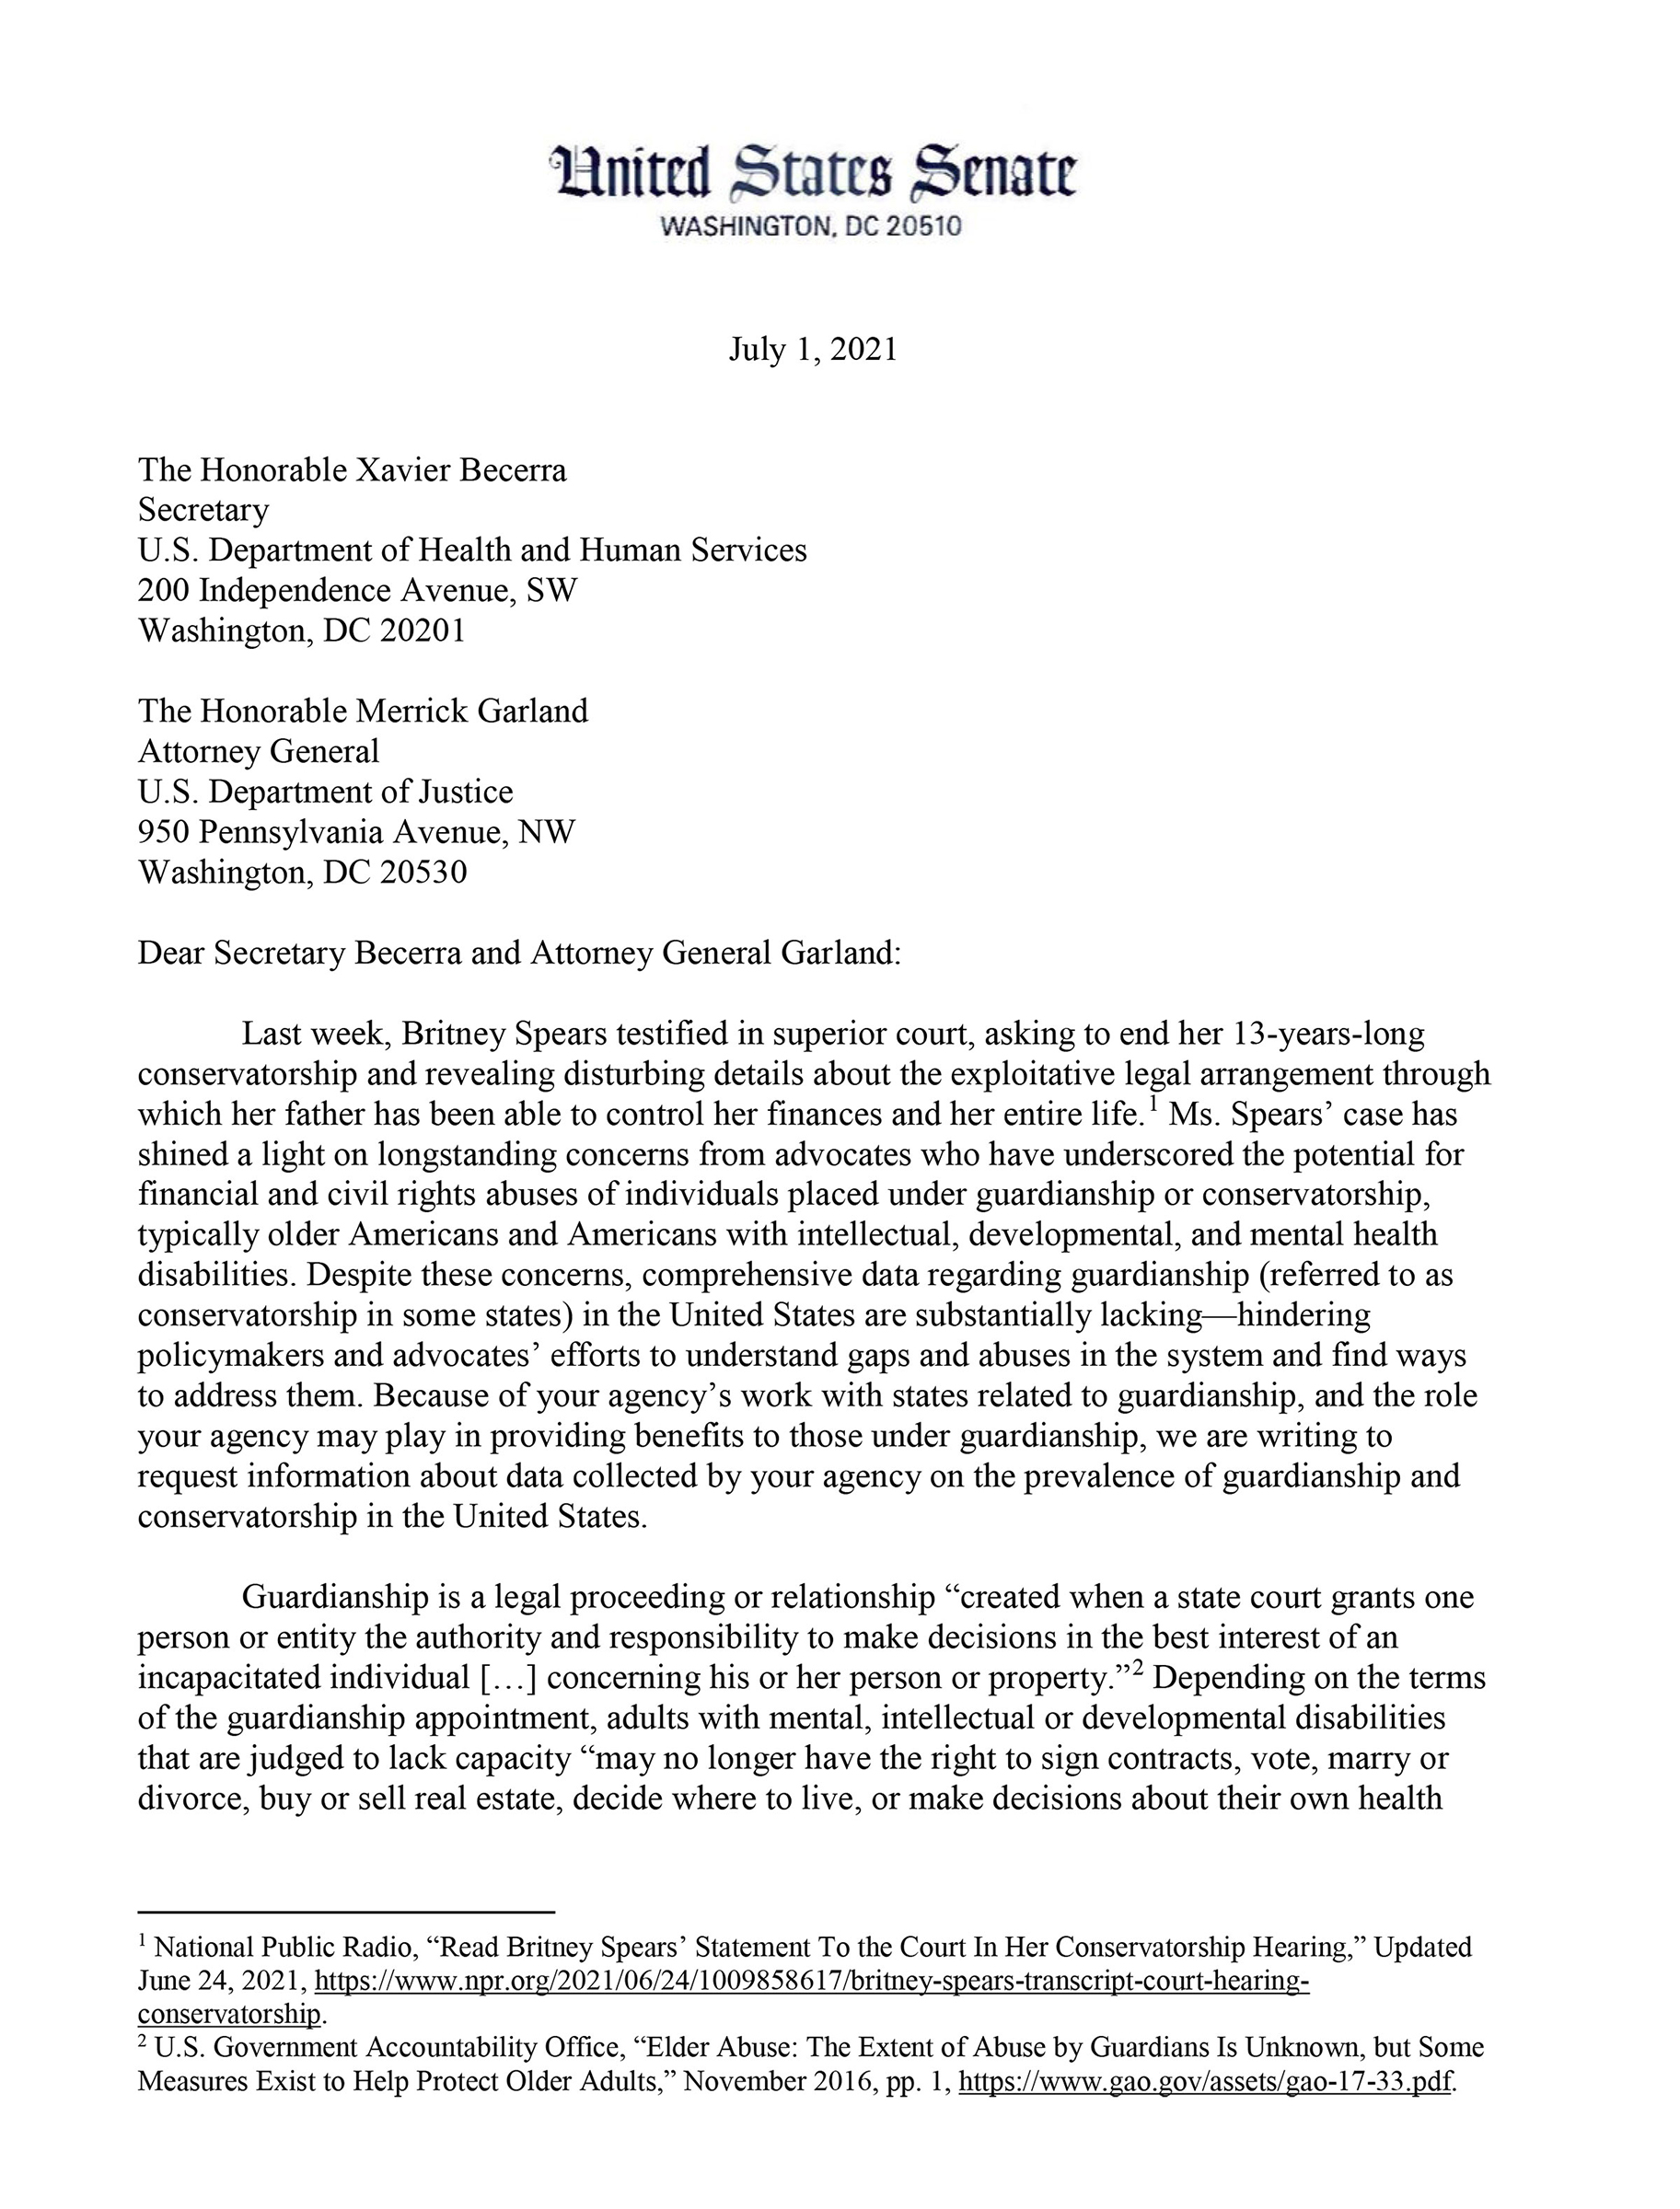 A letter Sens. Elizabeth Warren and Bob Casey sent to HHS and DOJ calling for more data on guardianships in the U.S.